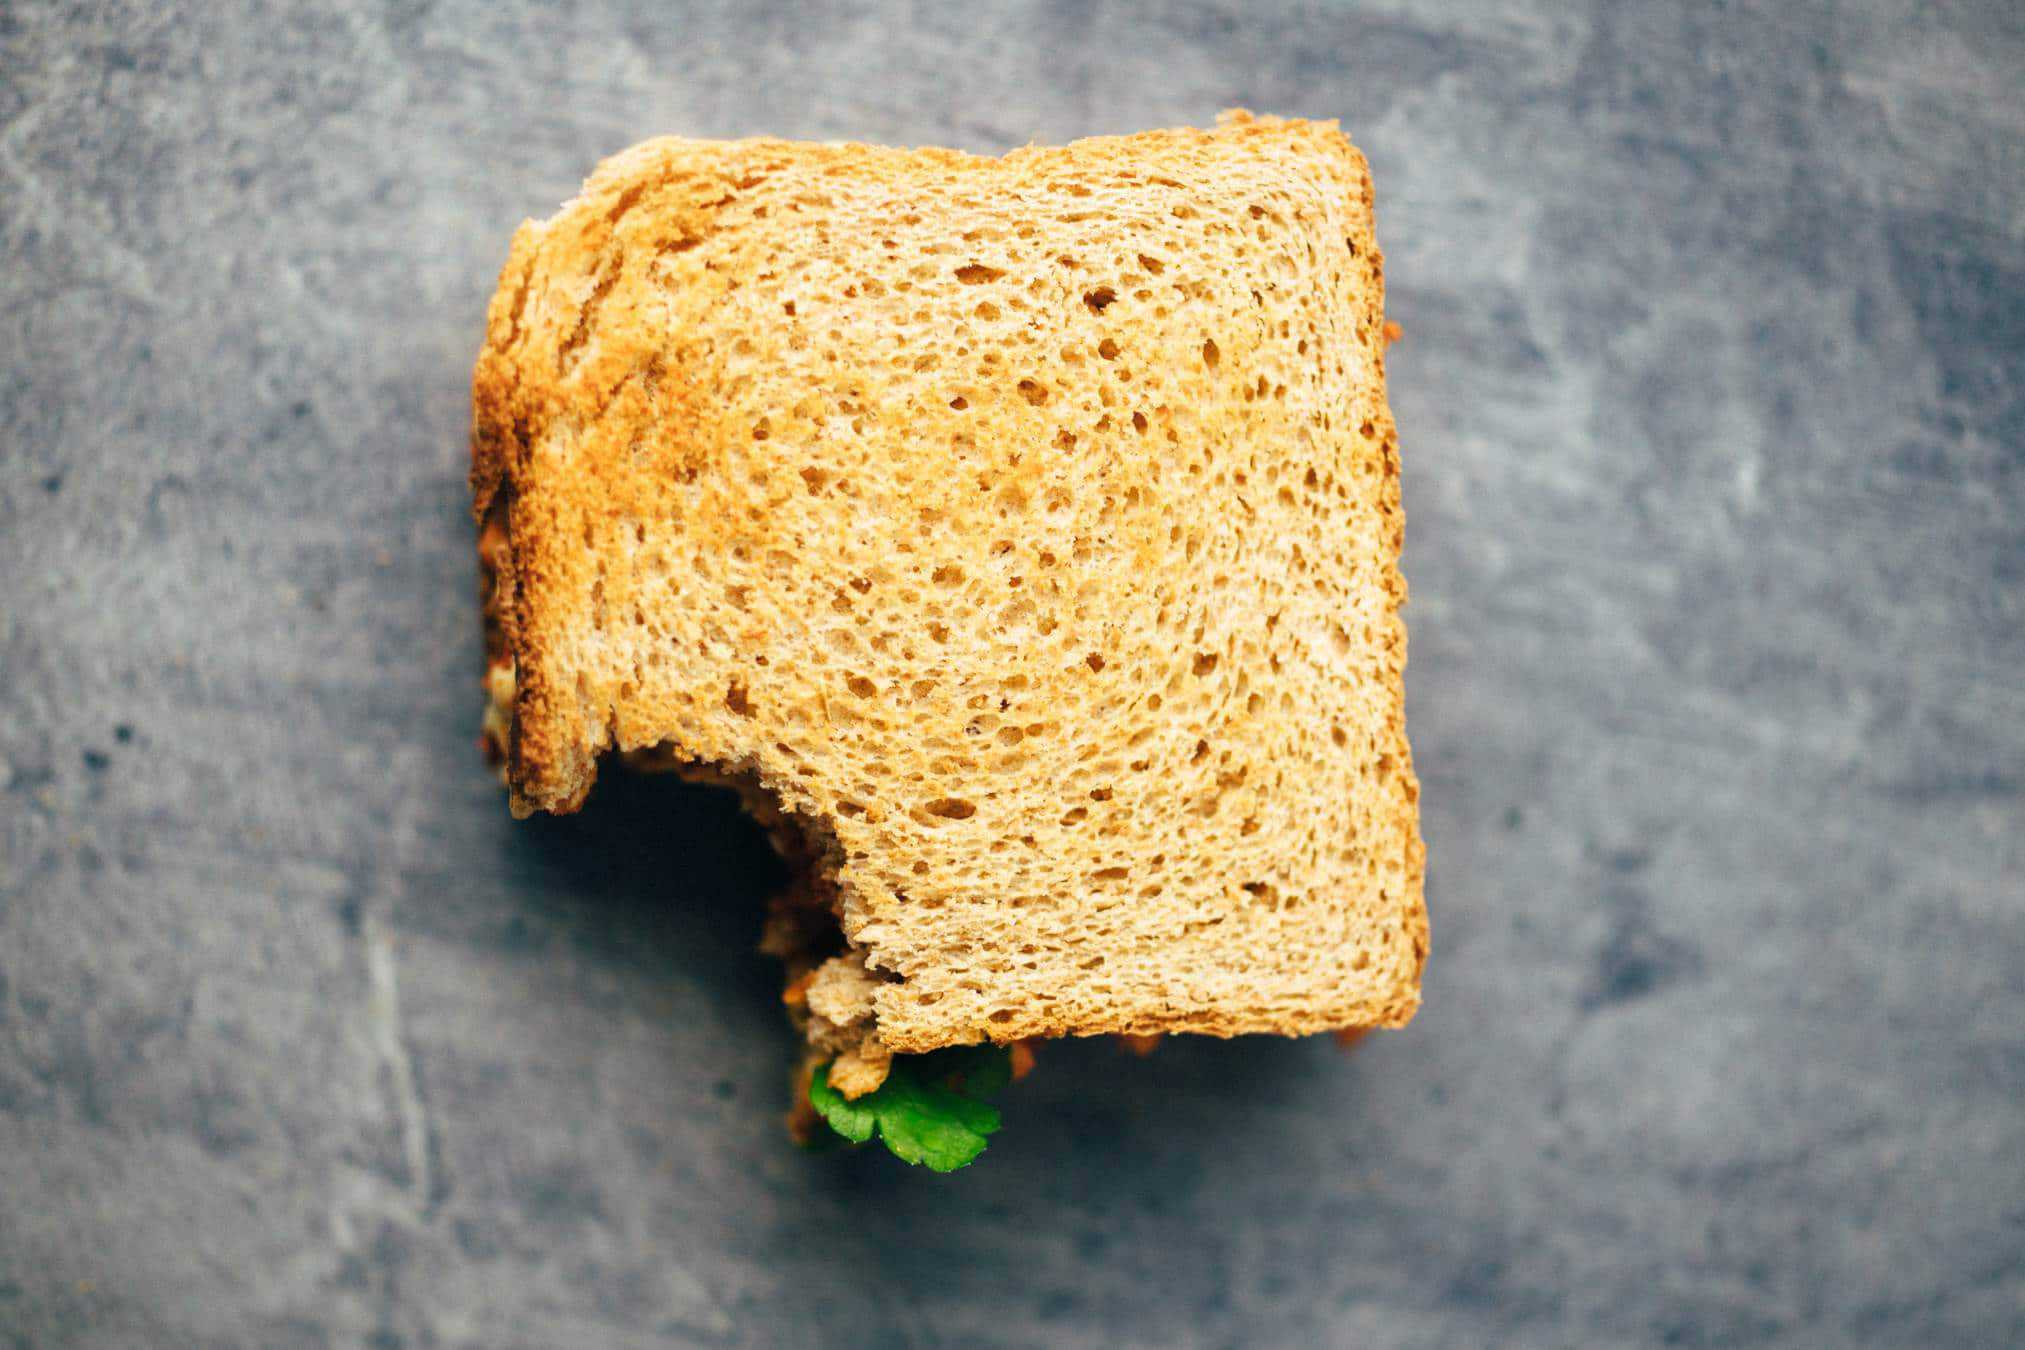 quick chickpea sandwich recipe in just 15 minutes